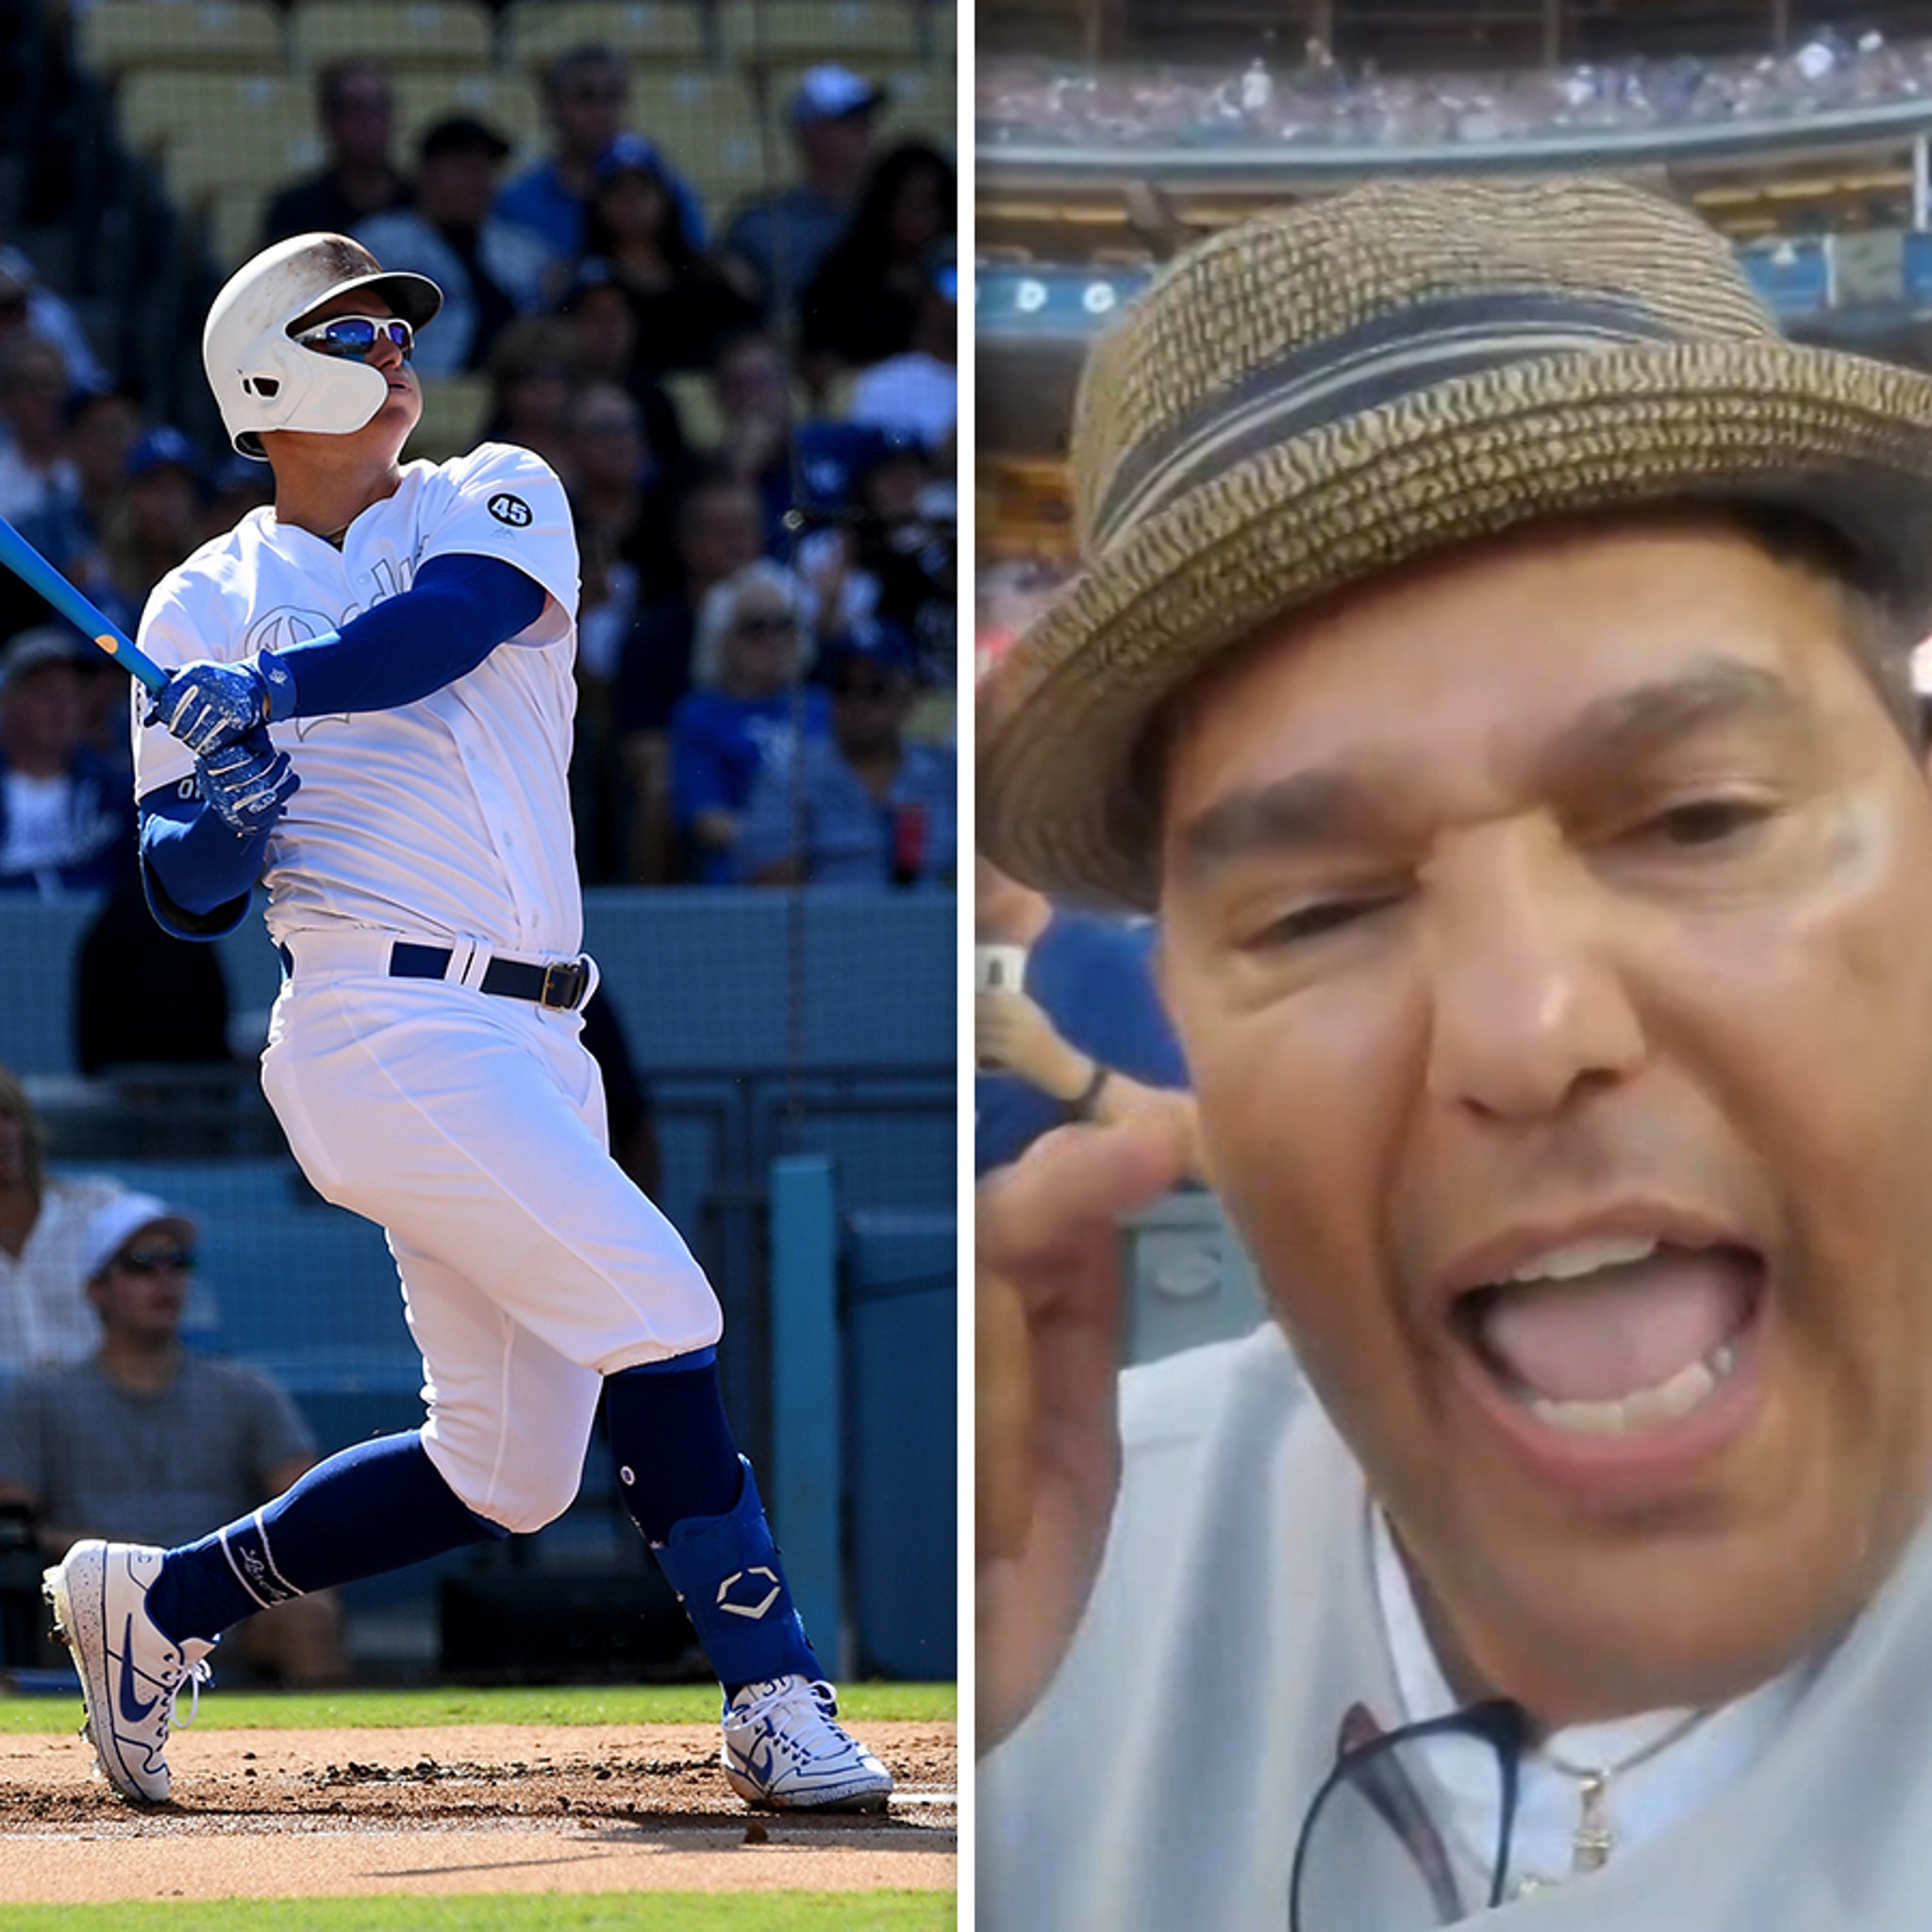 Nick Turturro Goes Nuclear on Joc Pederson, You Flipped Me Off!!!